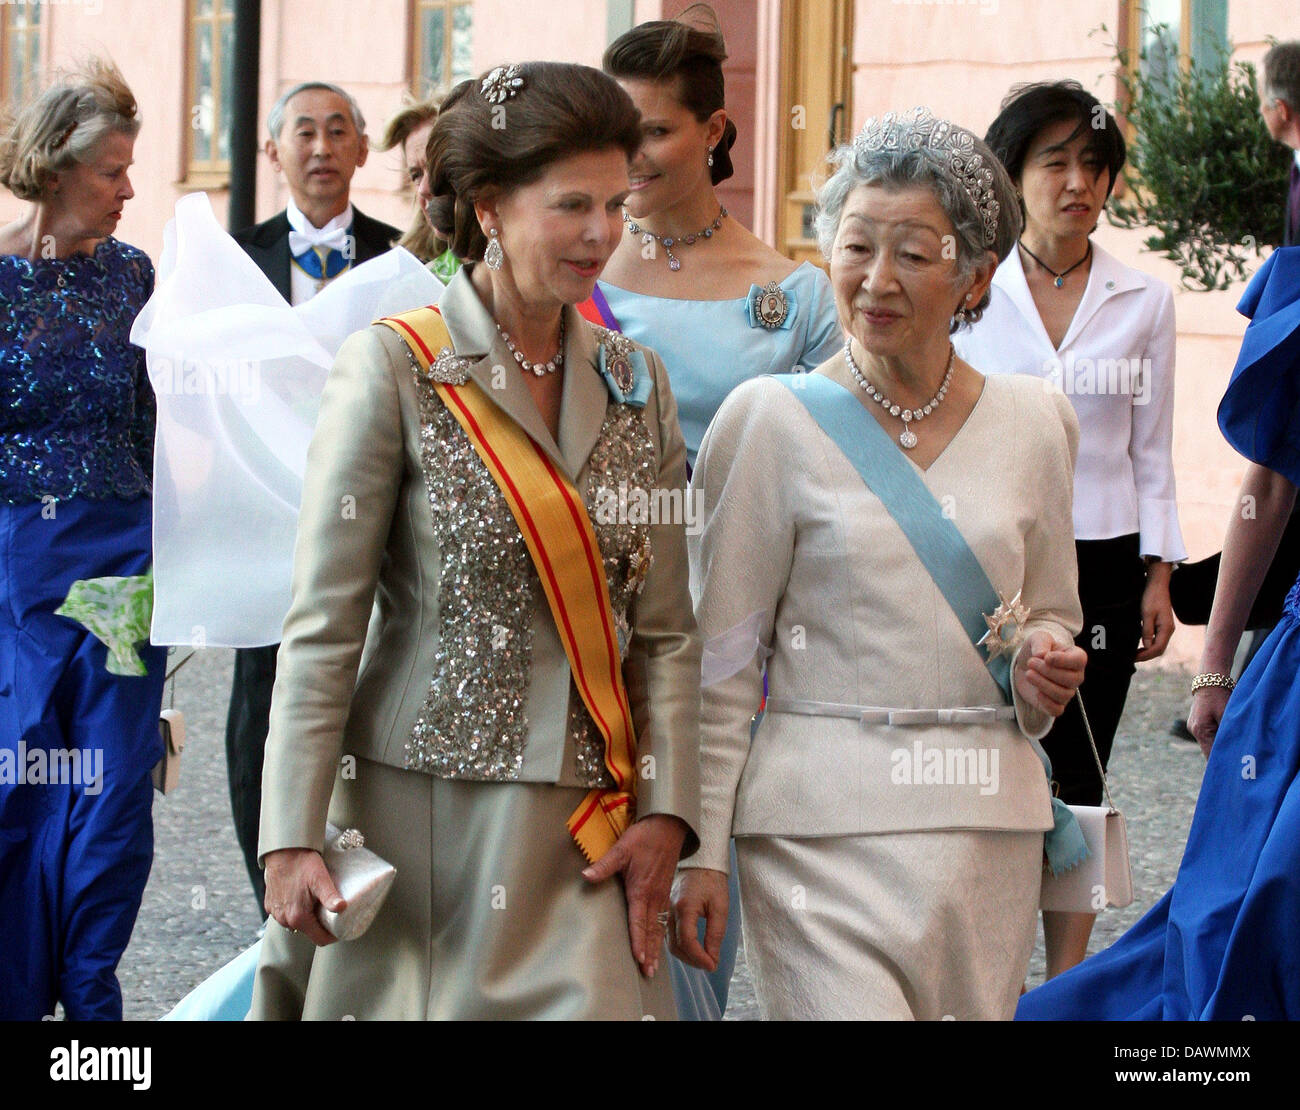 Queen Silvia of Sweden (L) and Japanese Empress Michiko arrive for a banquet at Uppsala Castle, Sweden, 23 May 2007. The Japanese Royal couple were guests of honour at festivities in Uppsala, as Sweden marks the 300th anniversary of its botanist Carolus Linnaeus. Photo: RoyalPress/Nieboer (NETHERLANDS OUT) Stock Photo